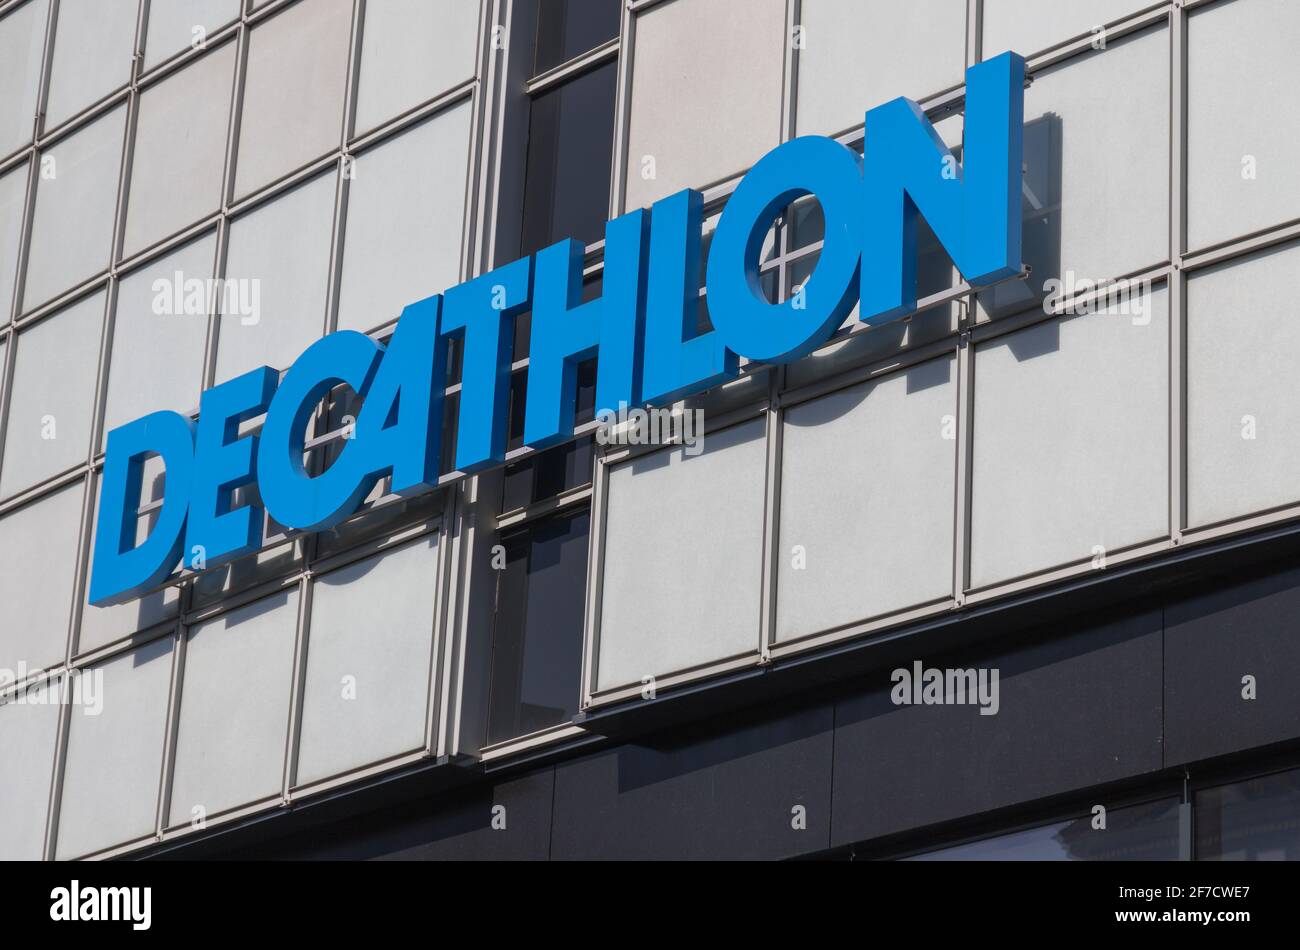 Decathlon Store France High Resolution Stock Photography and Images - Alamy